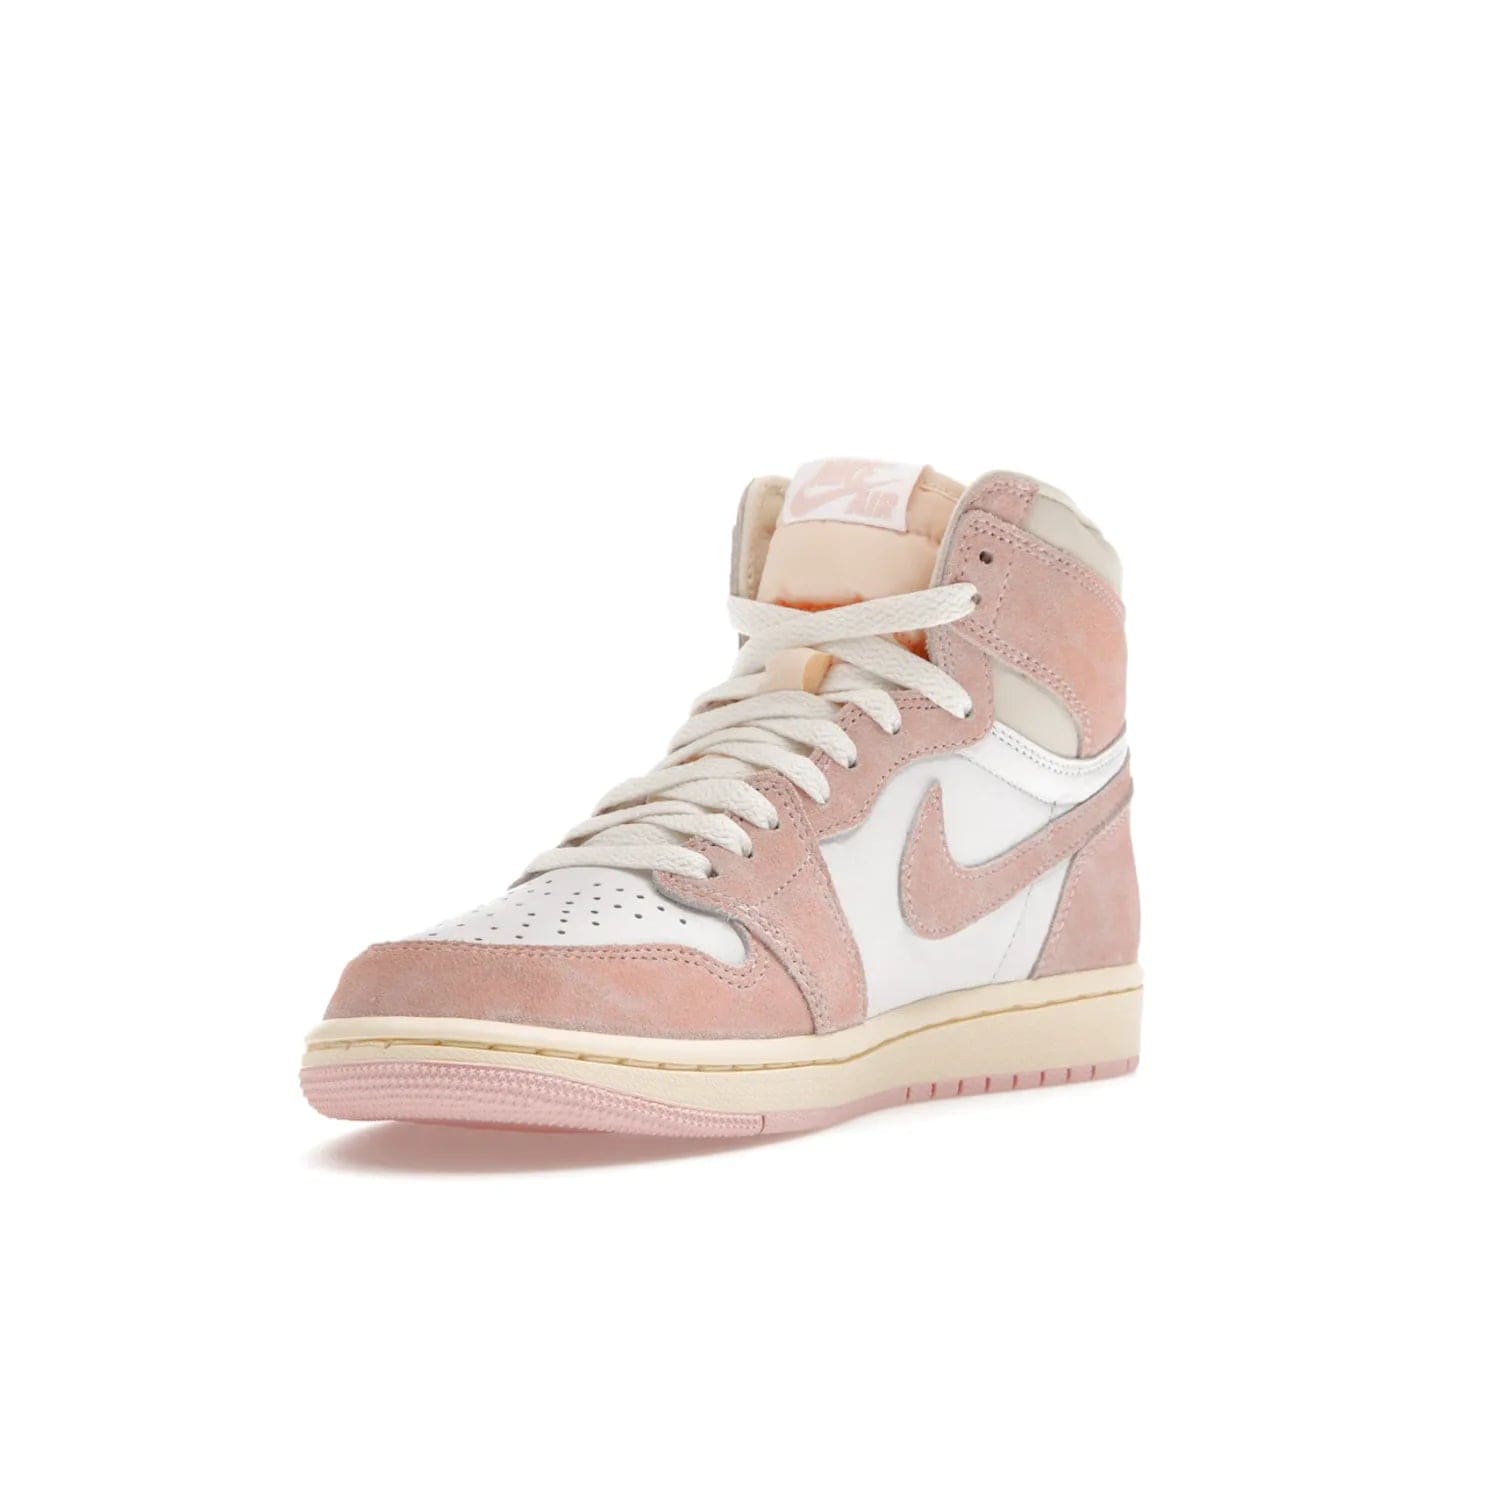 Jordan 1 Retro High OG Washed Pink (Women's) - Image 14 - Only at www.BallersClubKickz.com - Iconic Air Jordan 1 Retro High OG for women with unique pink suede and white leather uppers. Get the timeless look on April 22, 2023.